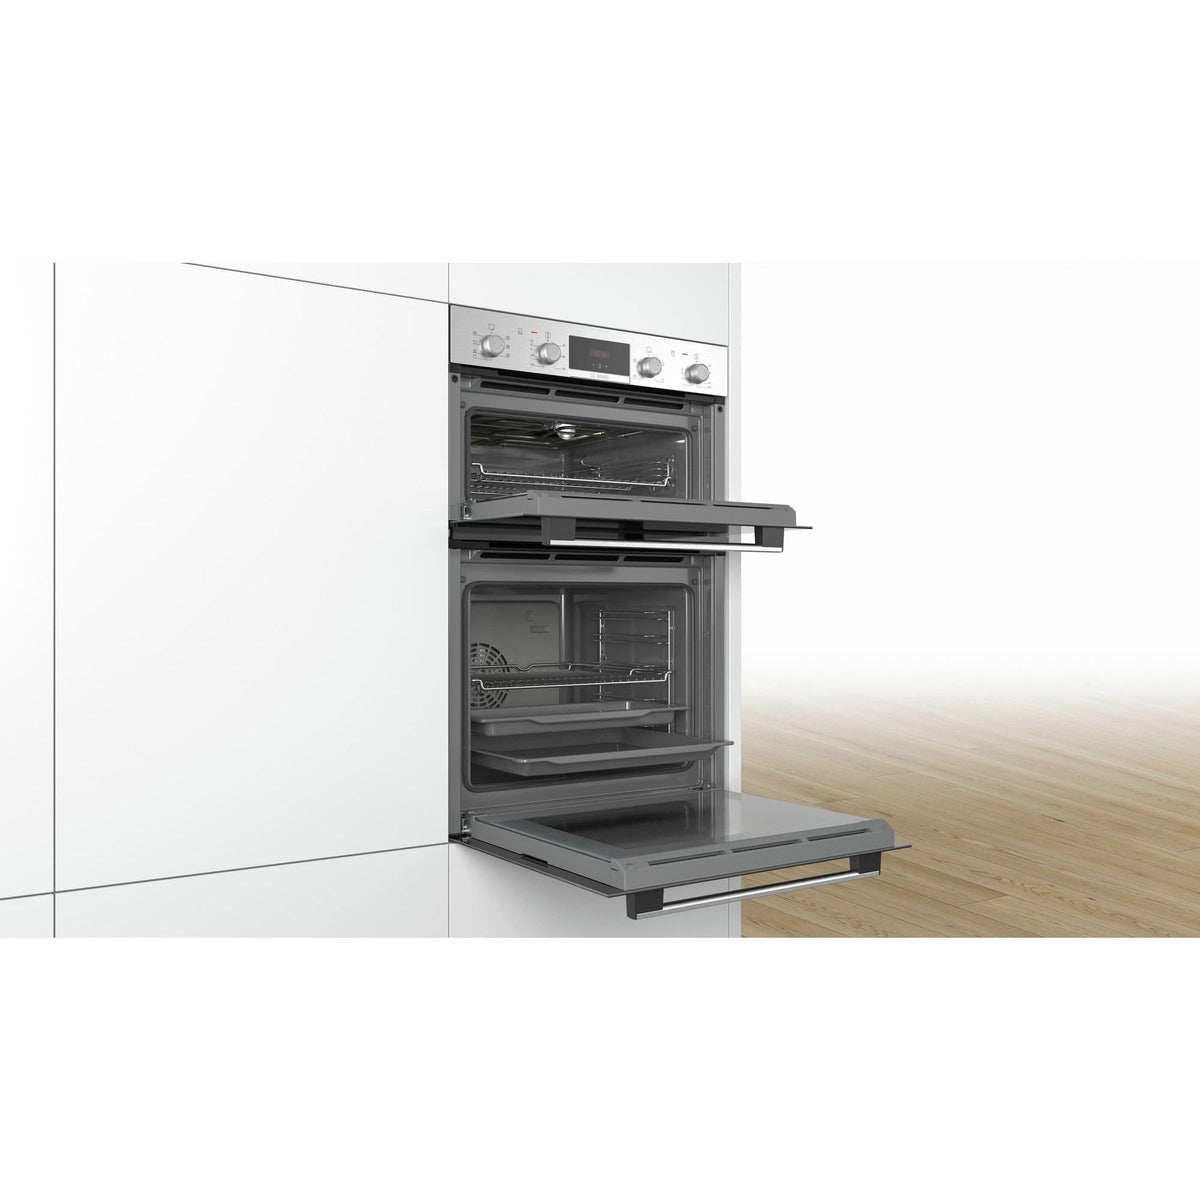 Bosch Serie 4 Built-In Electric Double Oven - Stainless Steel | MBS533BS0B from DID Electrical - guaranteed Irish, guaranteed quality service. (6890787012796)